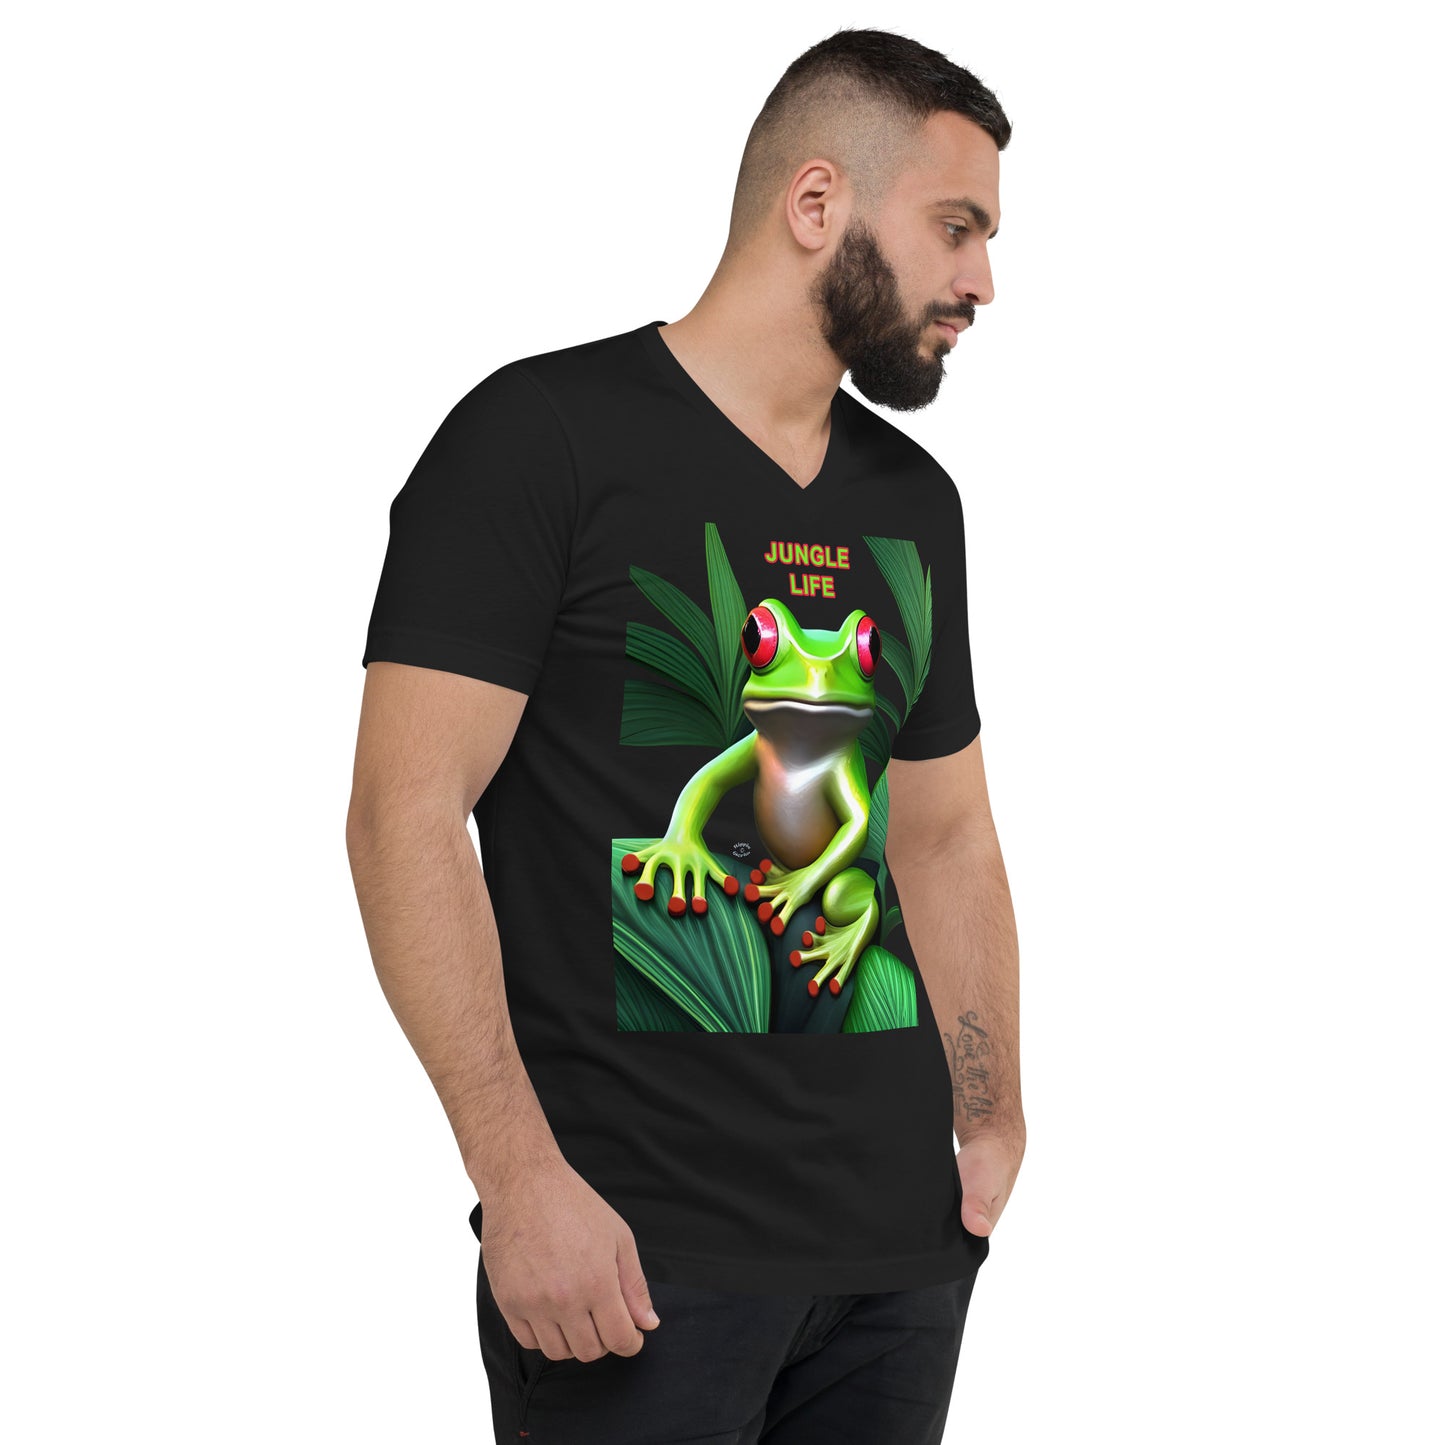 A picture of a man wearing a tshirt with a green frog poking through some leaves and the text JUNGLE LIFE - black right front